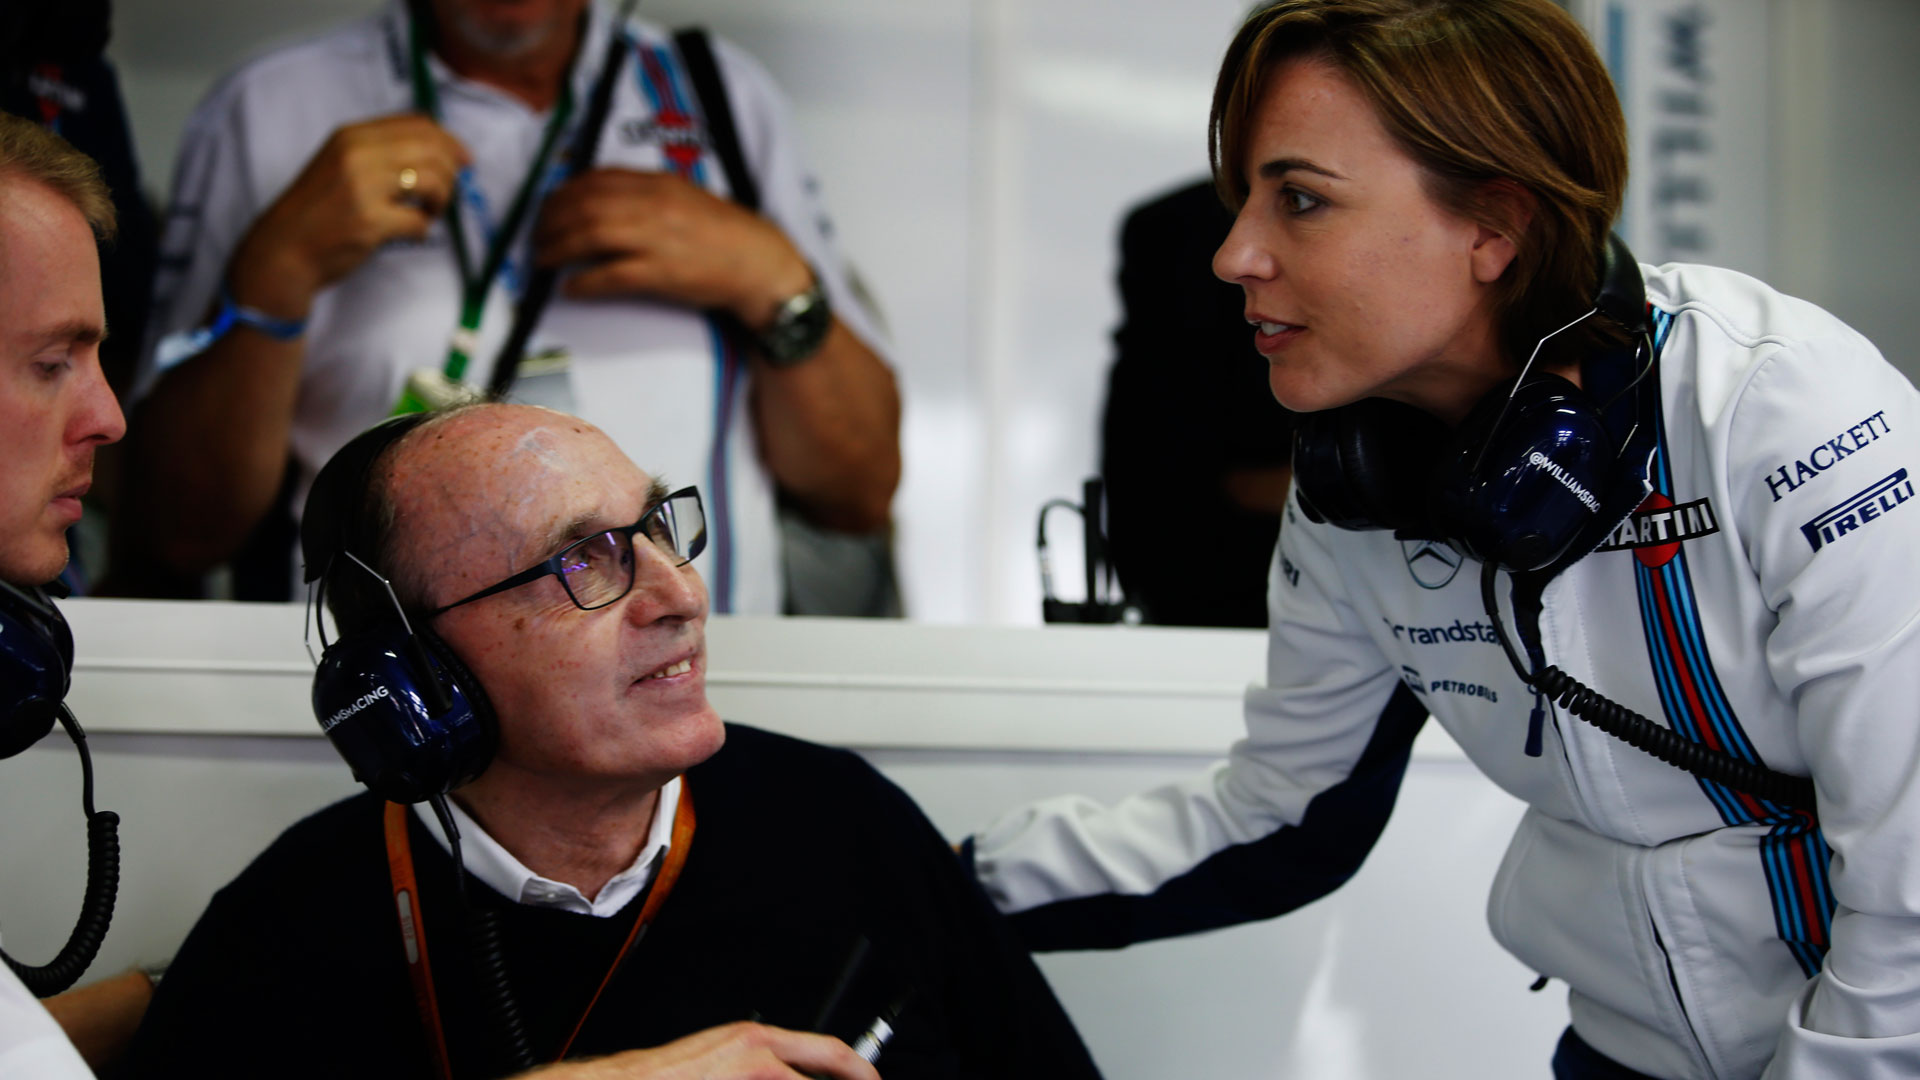 Sir Frank and Claire Williams